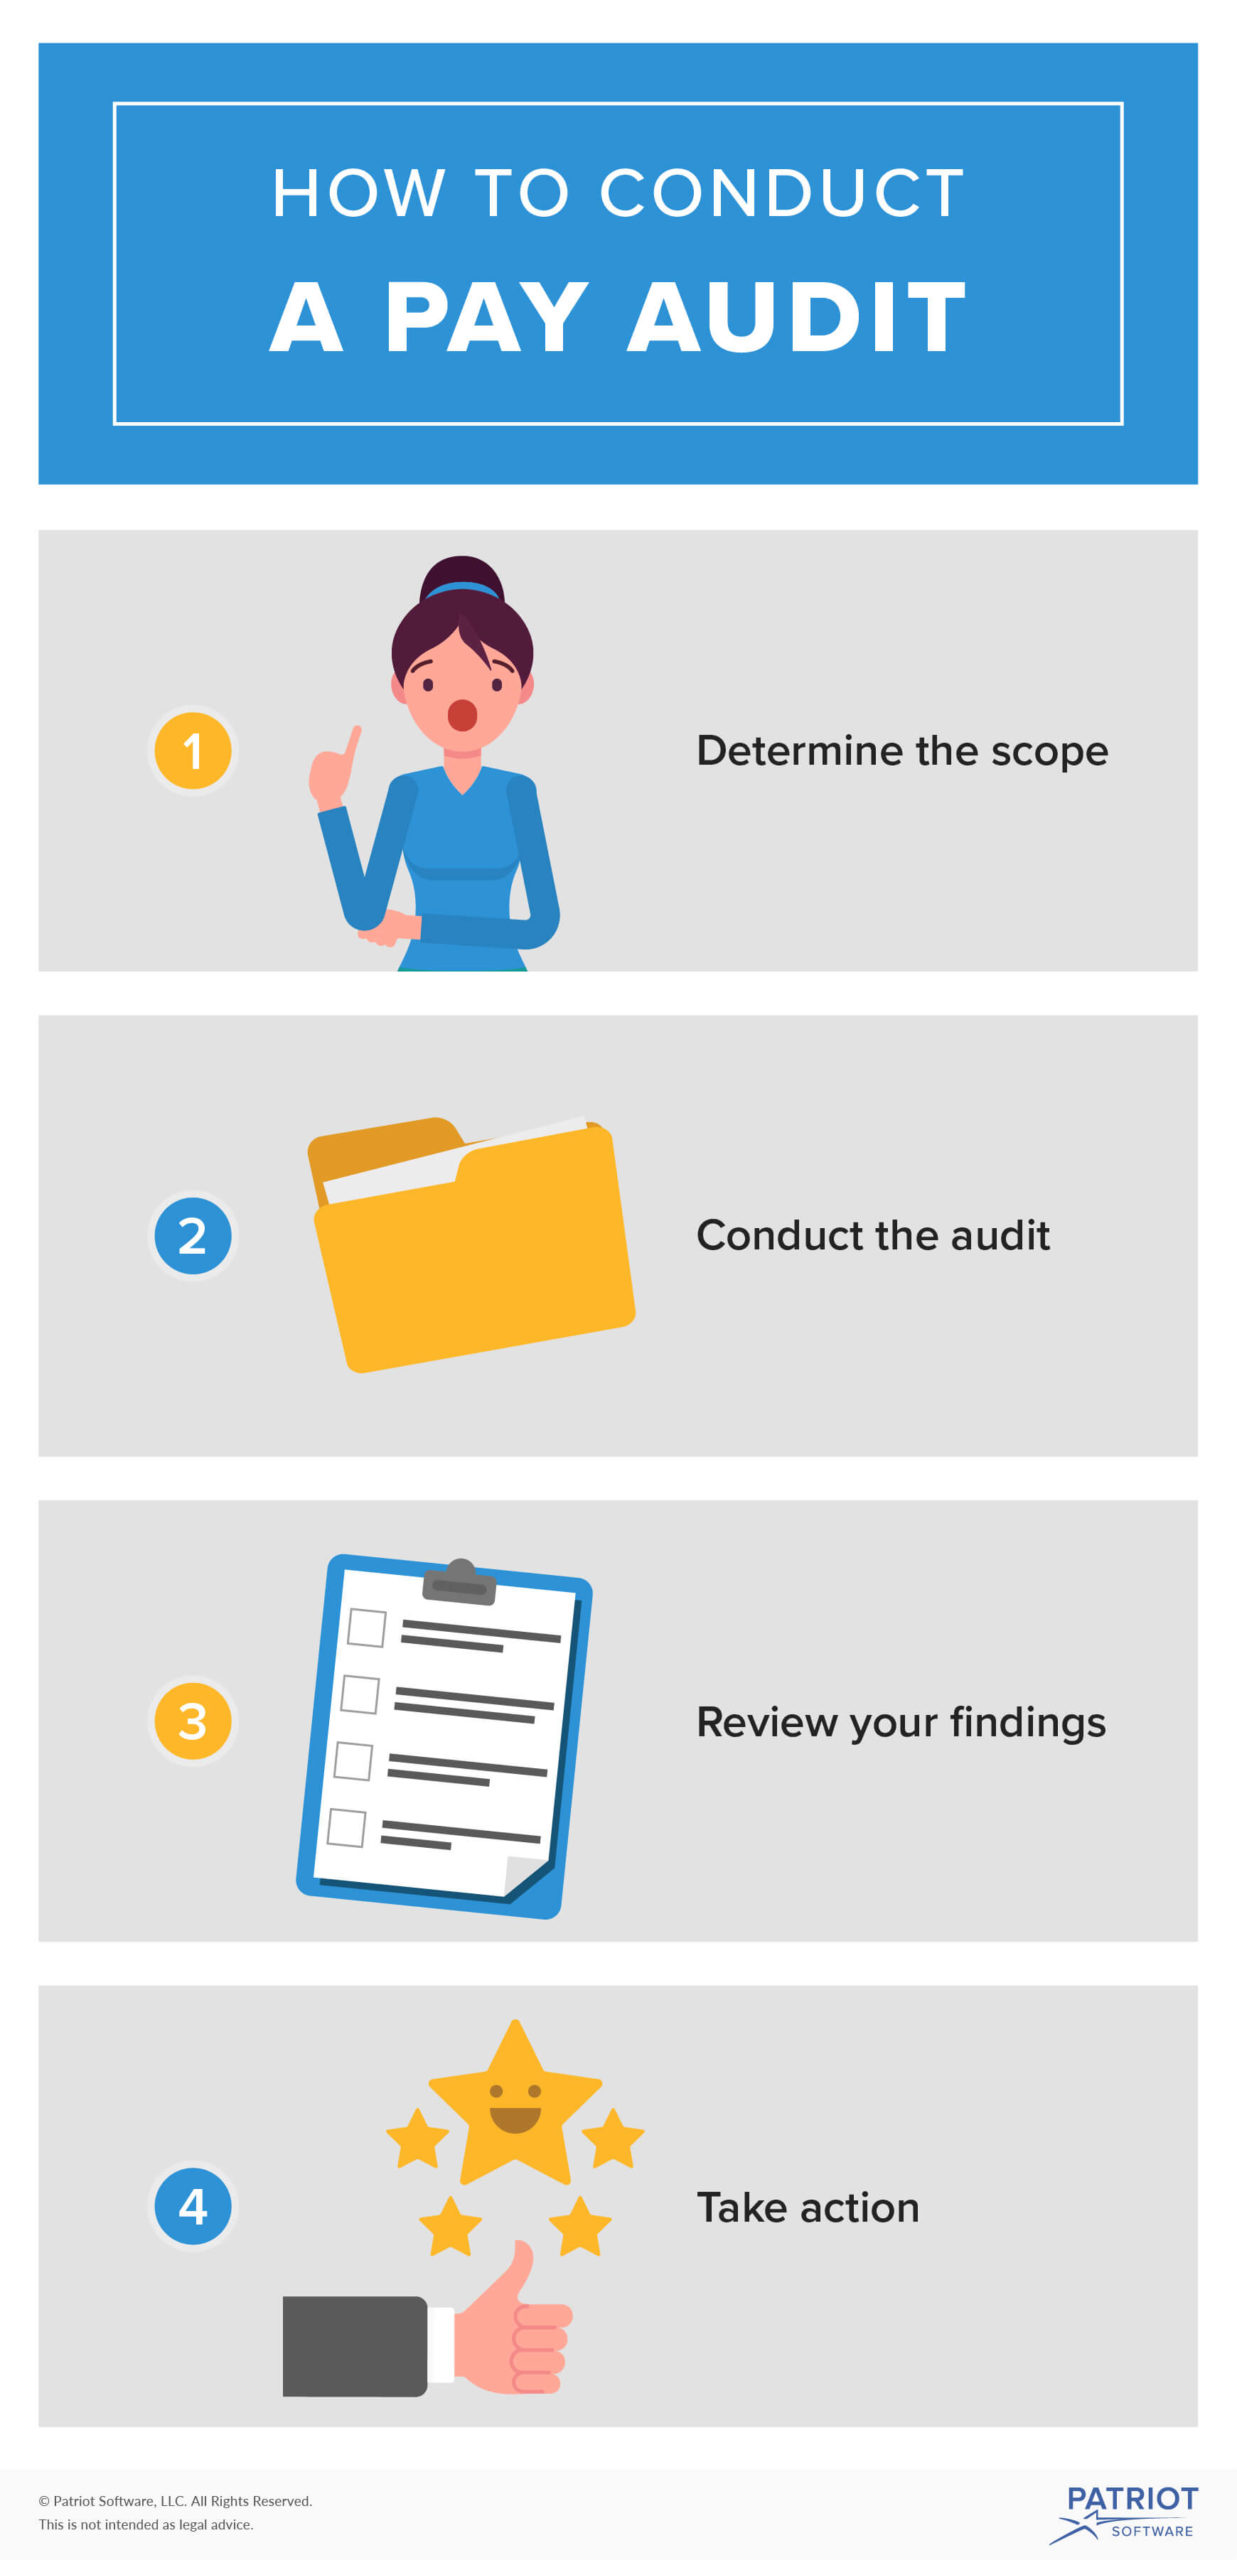 How to Conduct a Pay Audit